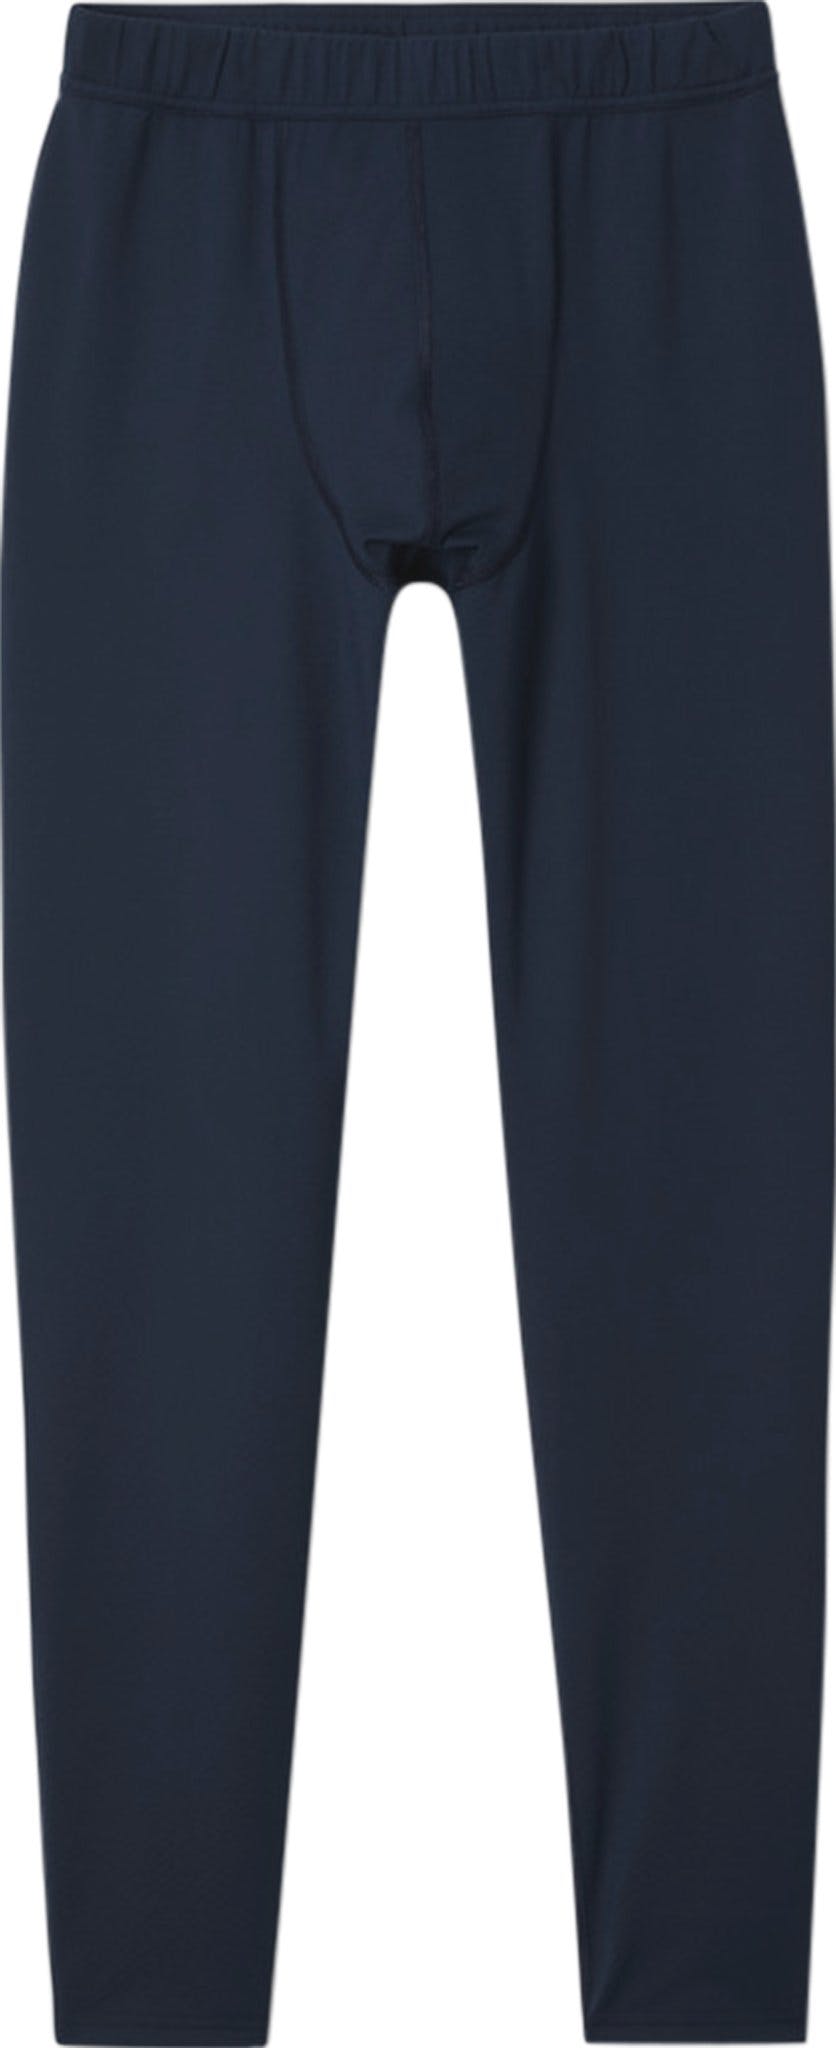 Product image for Omni-Heat Infinity Tight - Men's